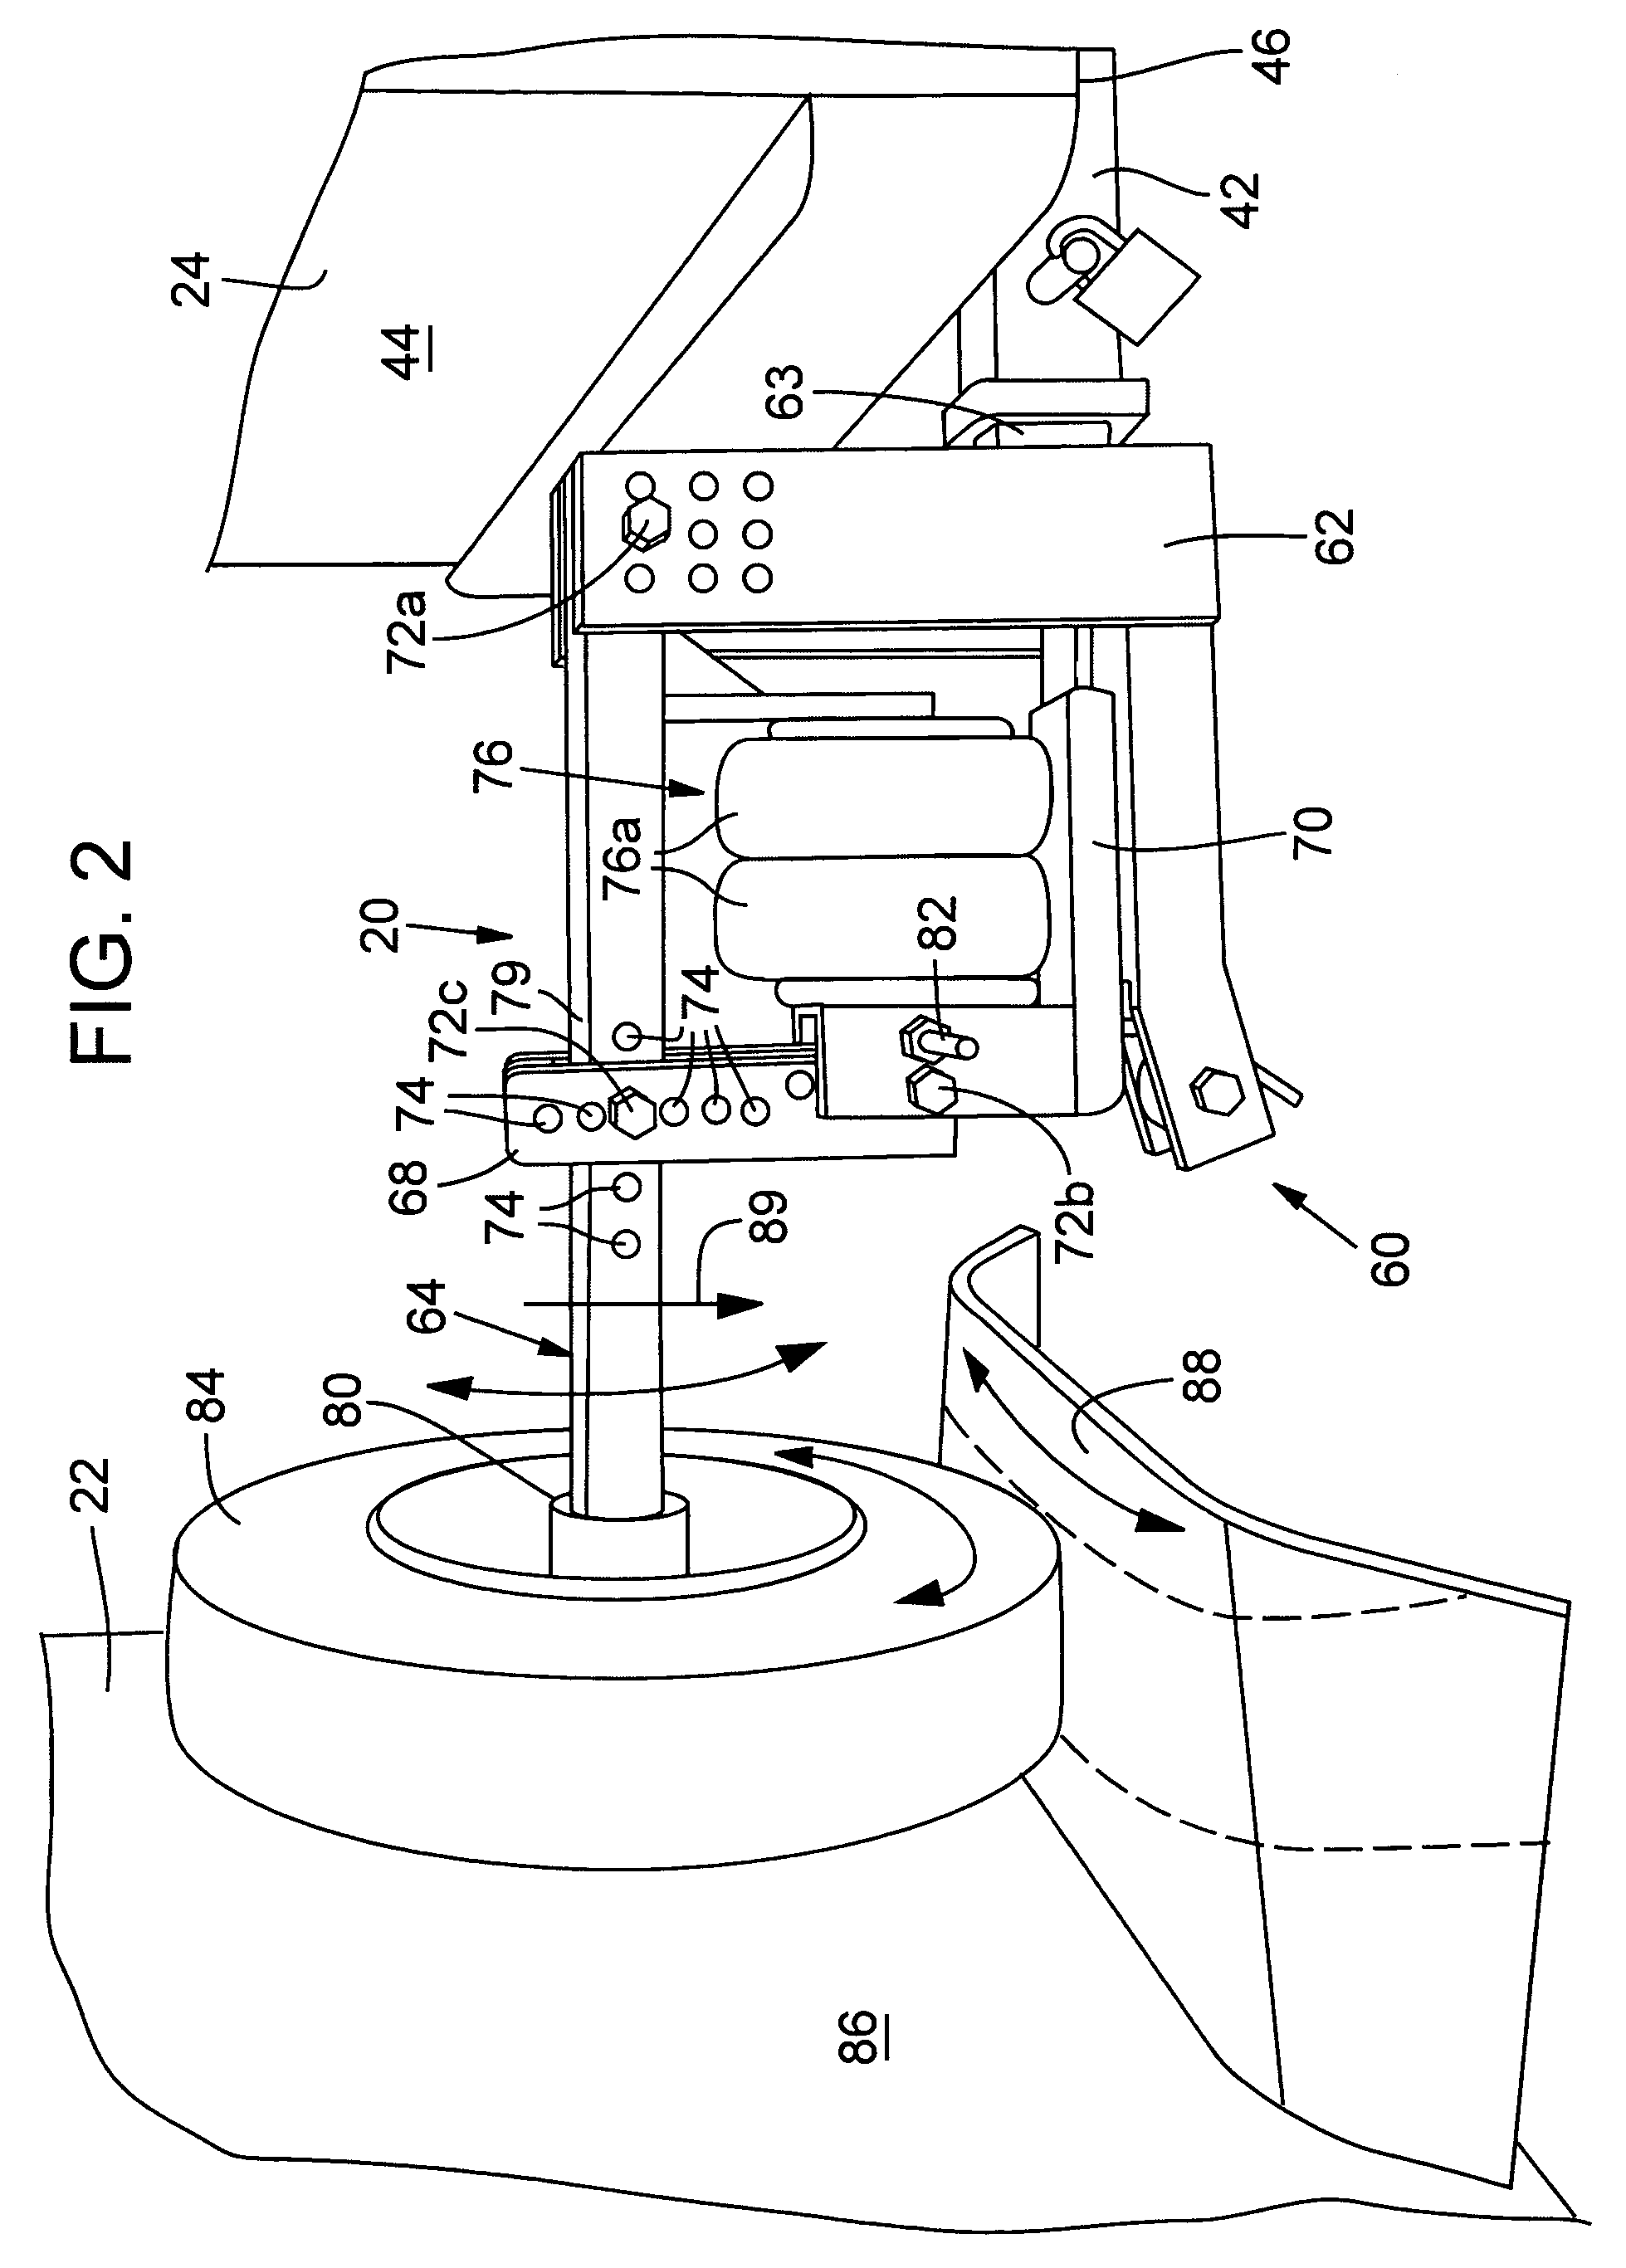 Trailer stabilization and weight distribution device